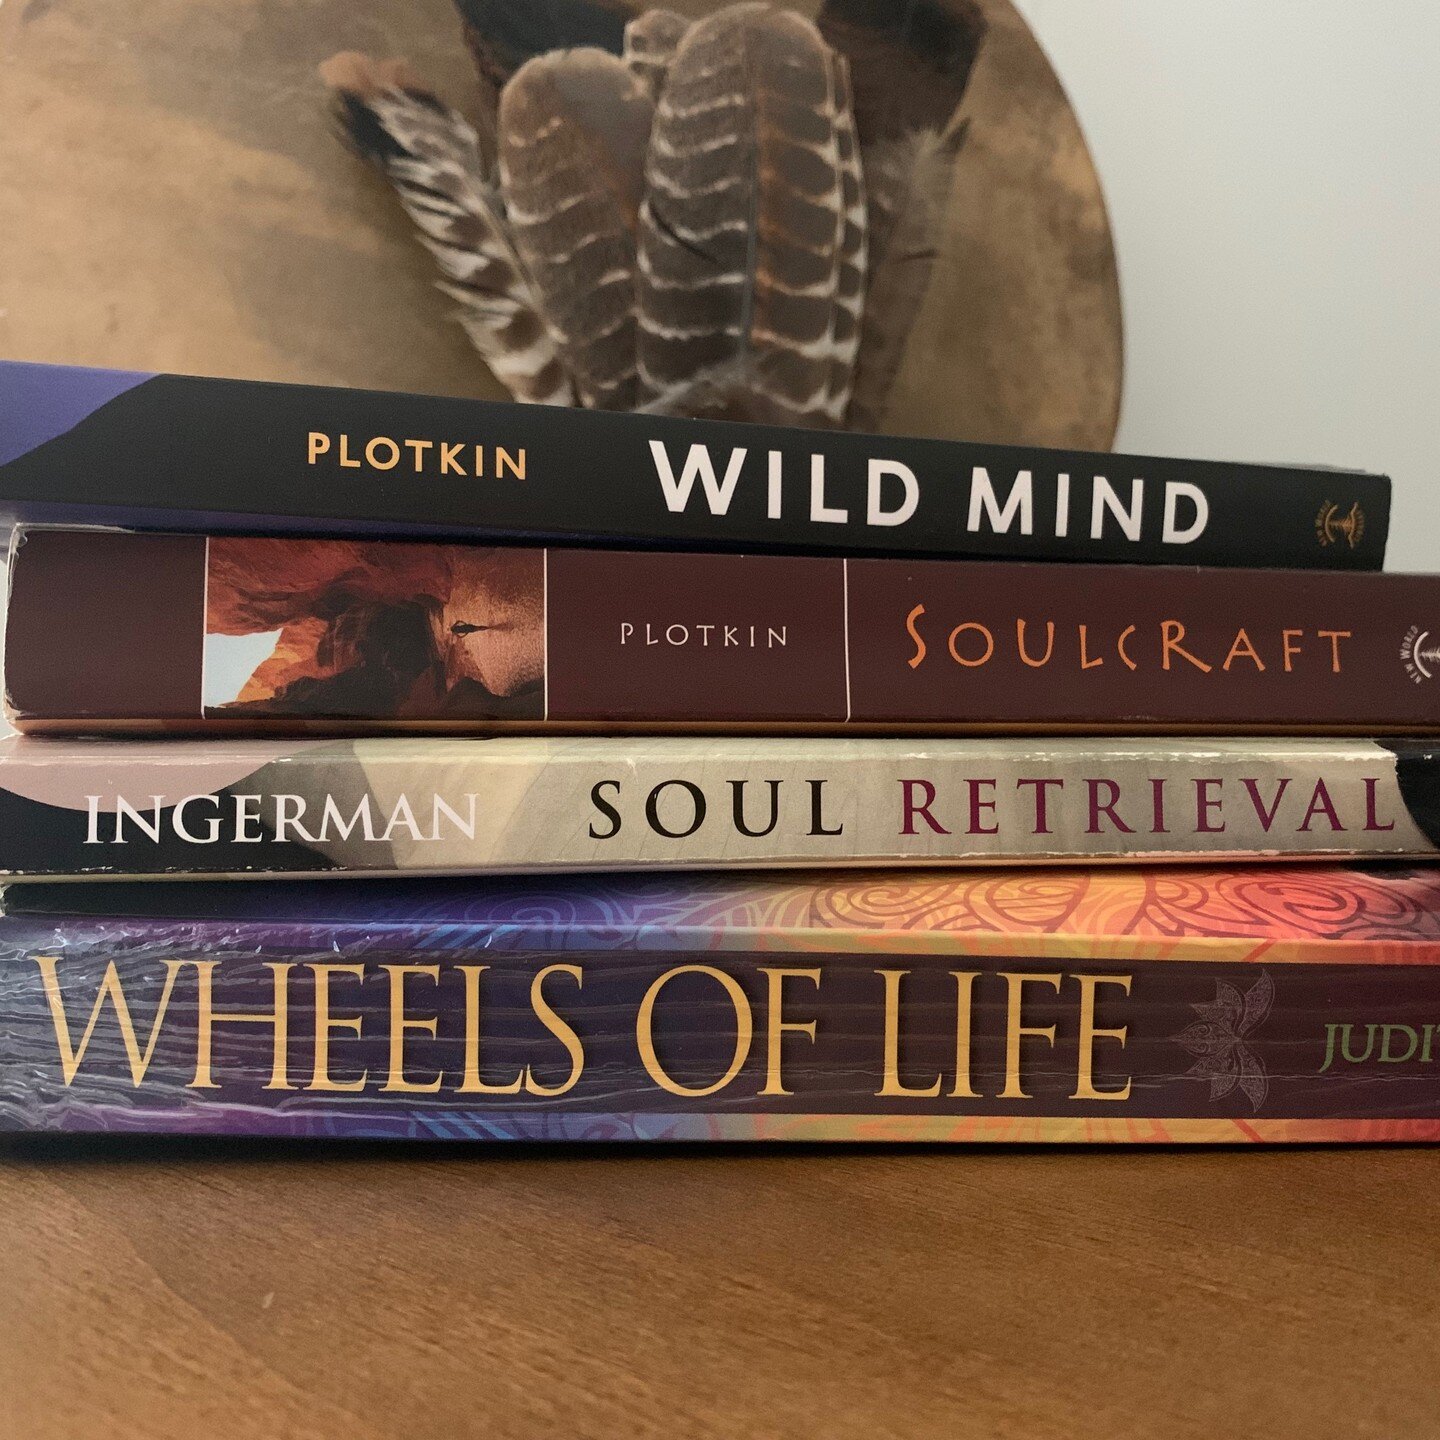 Some of my favorite guide books for getting to the root of old patterns.

When illness or challenges come, when shift happens - we tend to treat the symptoms rather than investigating the root cause. We tend to shy away.

Have you ever wondered -
Whe